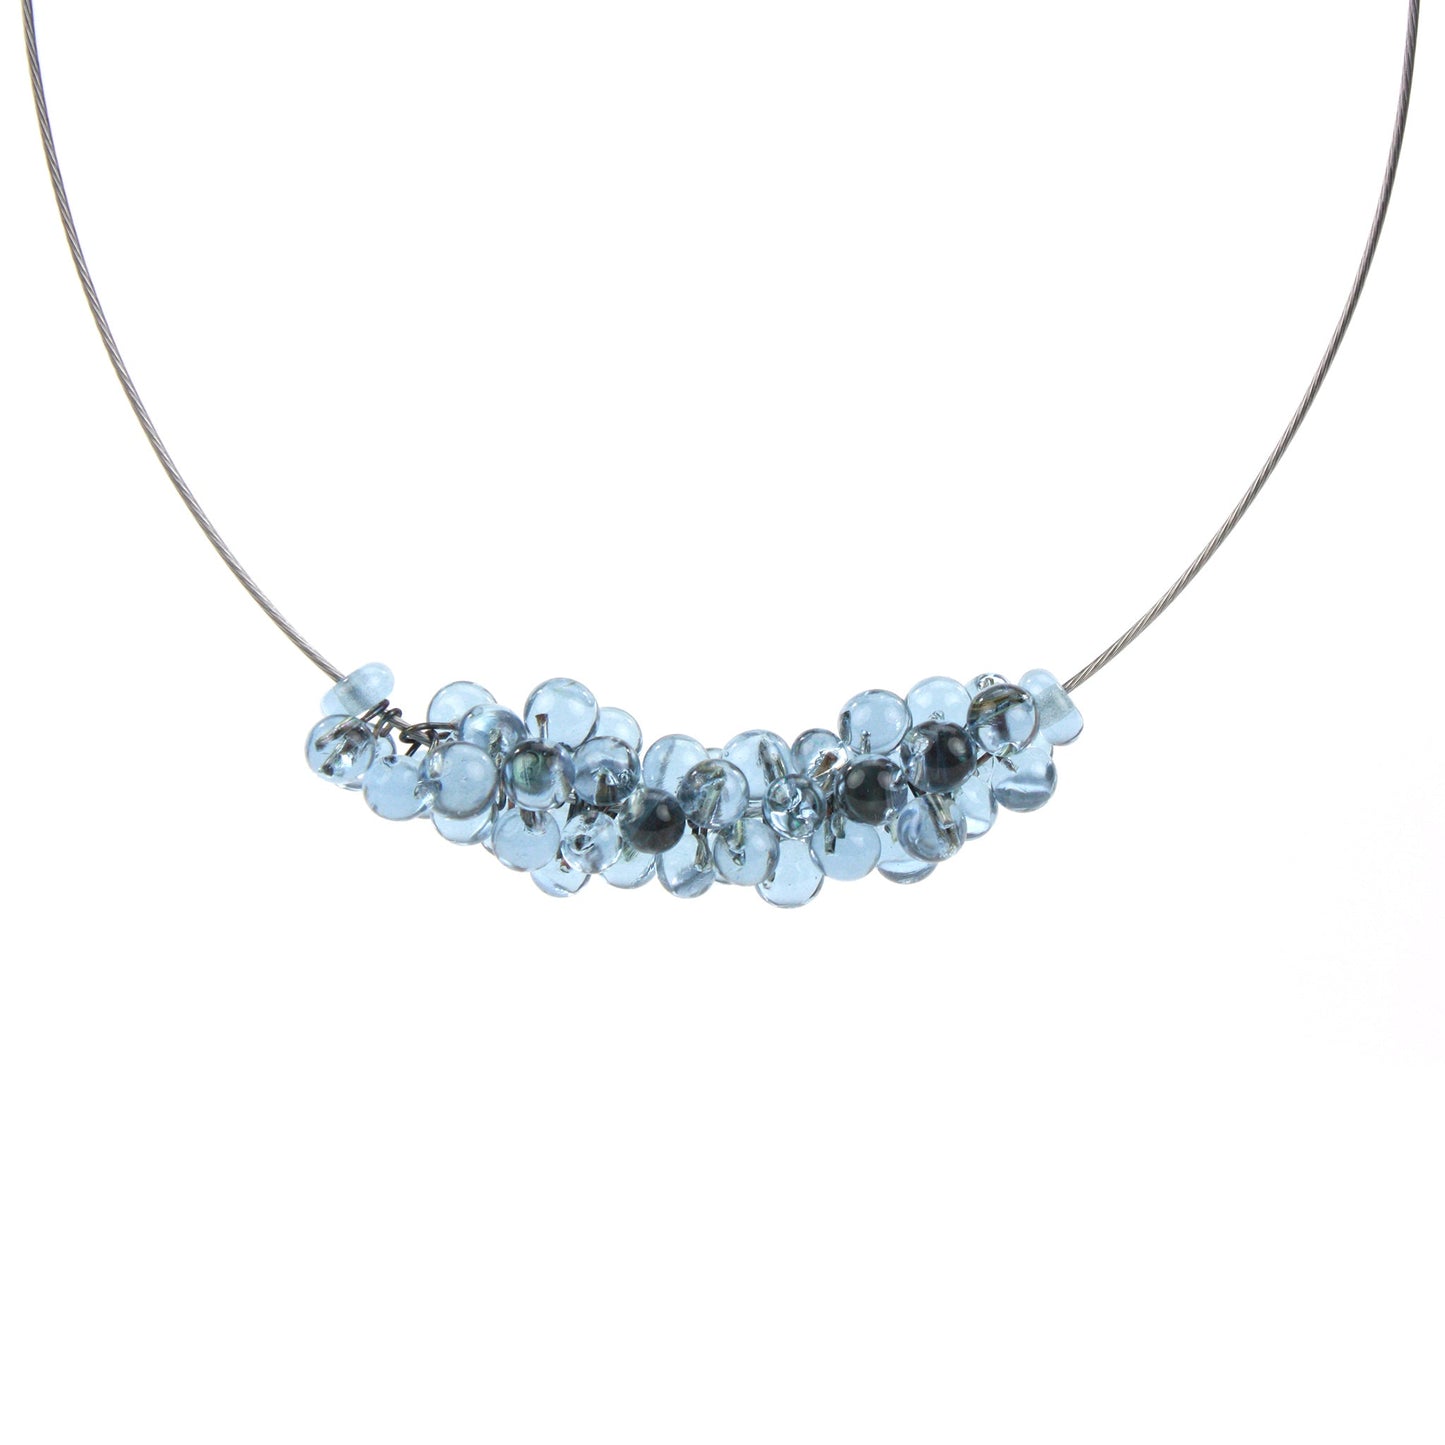 Petite Chroma Necklace in Purple/Blue - color changing